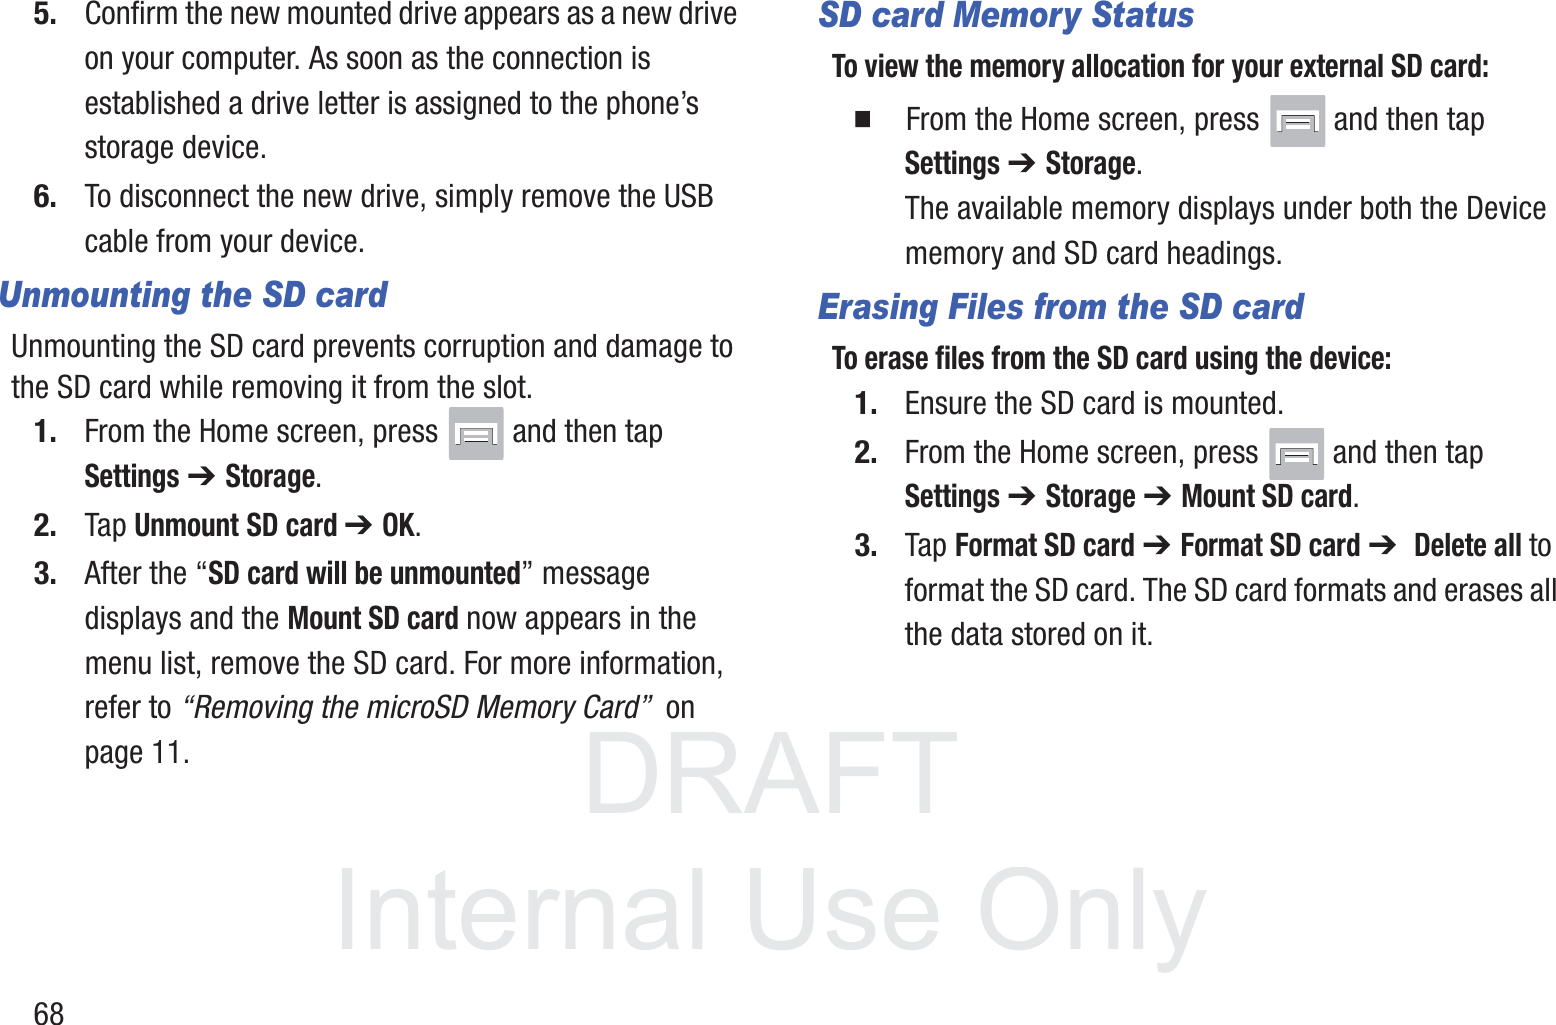 DRAFT InternalUse Only685. Confirm the new mounted drive appears as a new drive on your computer. As soon as the connection is established a drive letter is assigned to the phone’s storage device.6. To disconnect the new drive, simply remove the USB cable from your device.Unmounting the SD cardUnmounting the SD card prevents corruption and damage to the SD card while removing it from the slot.1. From the Home screen, press   and then tap Settings ➔ Storage.2. Tap Unmount SD card ➔ OK.3. After the “SD card will be unmounted” message displays and the Mount SD card now appears in the menu list, remove the SD card. For more information, refer to “Removing the microSD Memory Card”  on page 11.SD card Memory StatusTo view the memory allocation for your external SD card:䡲  From the Home screen, press   and then tap Settings ➔ Storage. The available memory displays under both the Device memory and SD card headings.Erasing Files from the SD cardTo erase files from the SD card using the device:1. Ensure the SD card is mounted. 2. From the Home screen, press   and then tap Settings ➔ Storage➔ Mount SD card.3. Tap Format SD card ➔ Format SD card ➔  Delete all to format the SD card. The SD card formats and erases all the data stored on it.